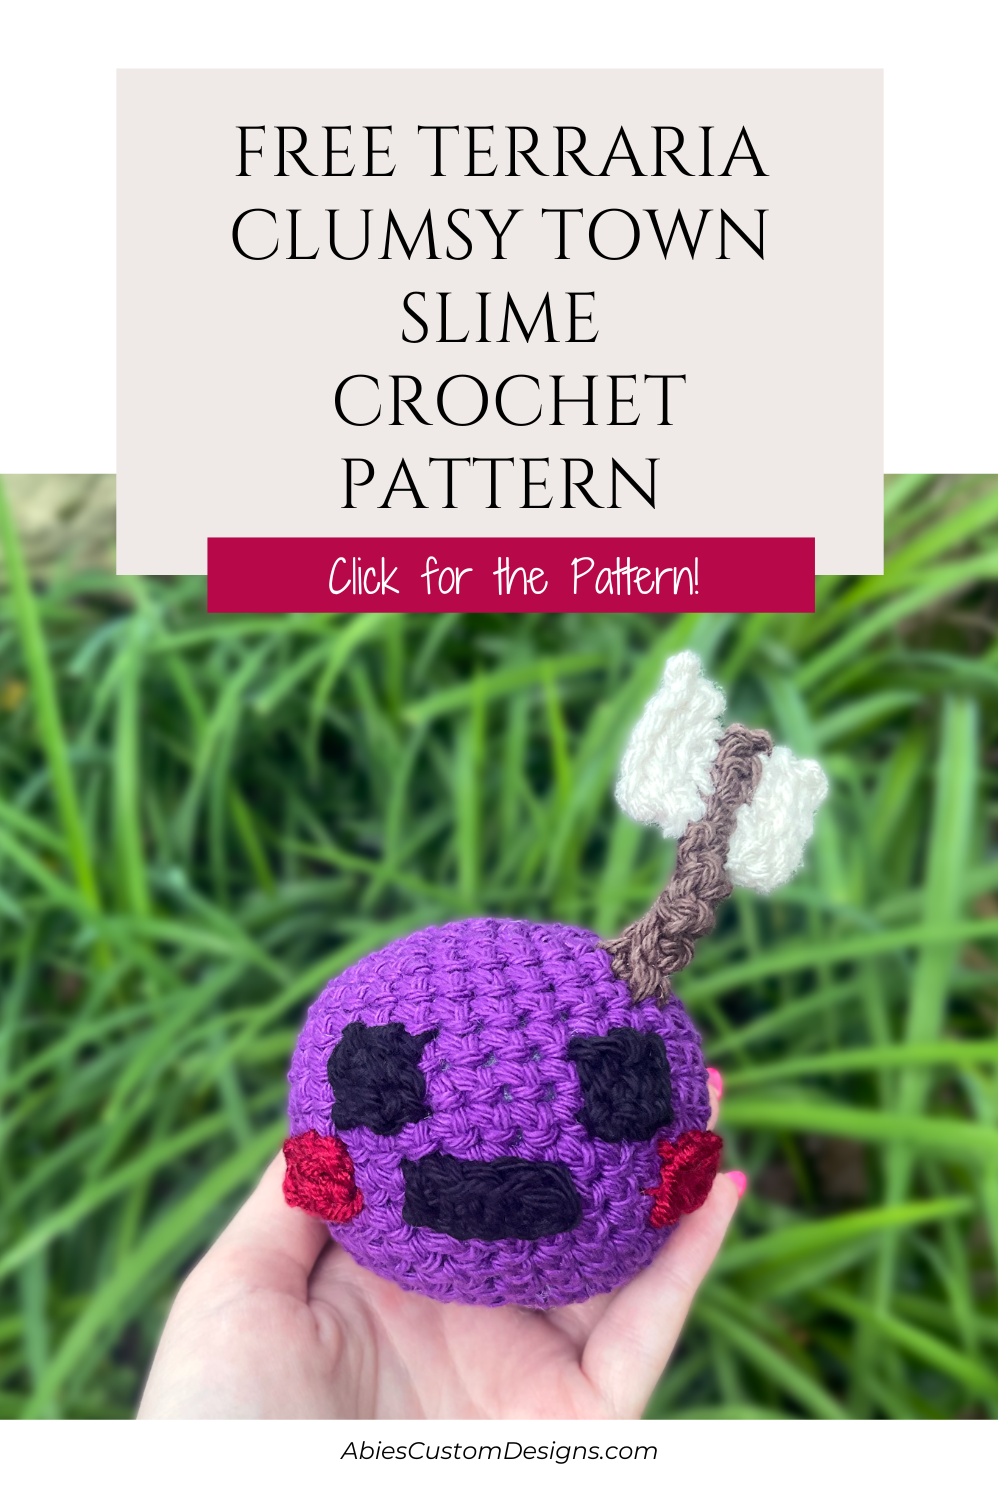 Free Terraria Clumsy Town Slime Crochet Pattern